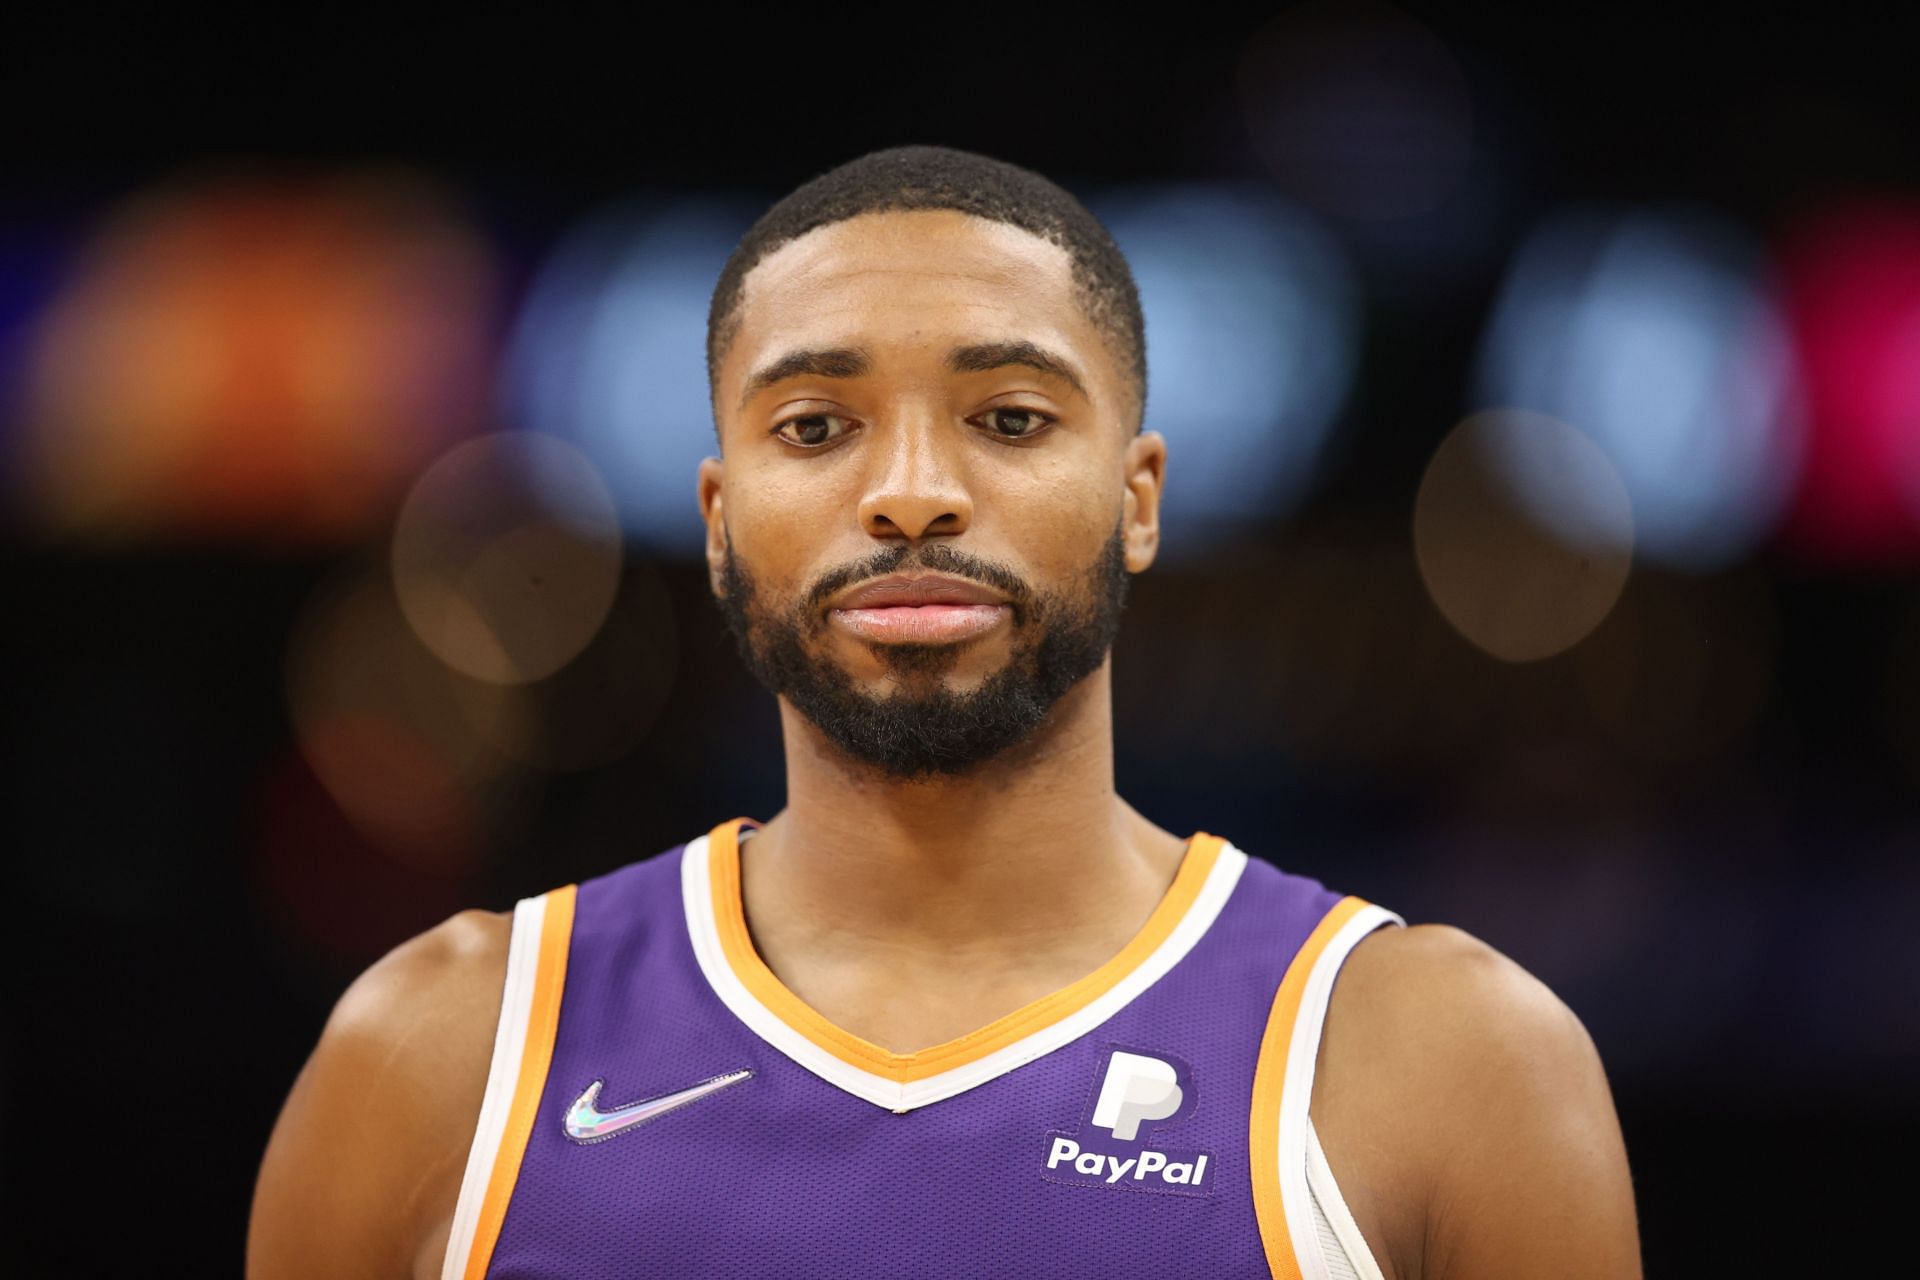 Phoenix Suns wing Mikal Bridges has impressed with his recent play